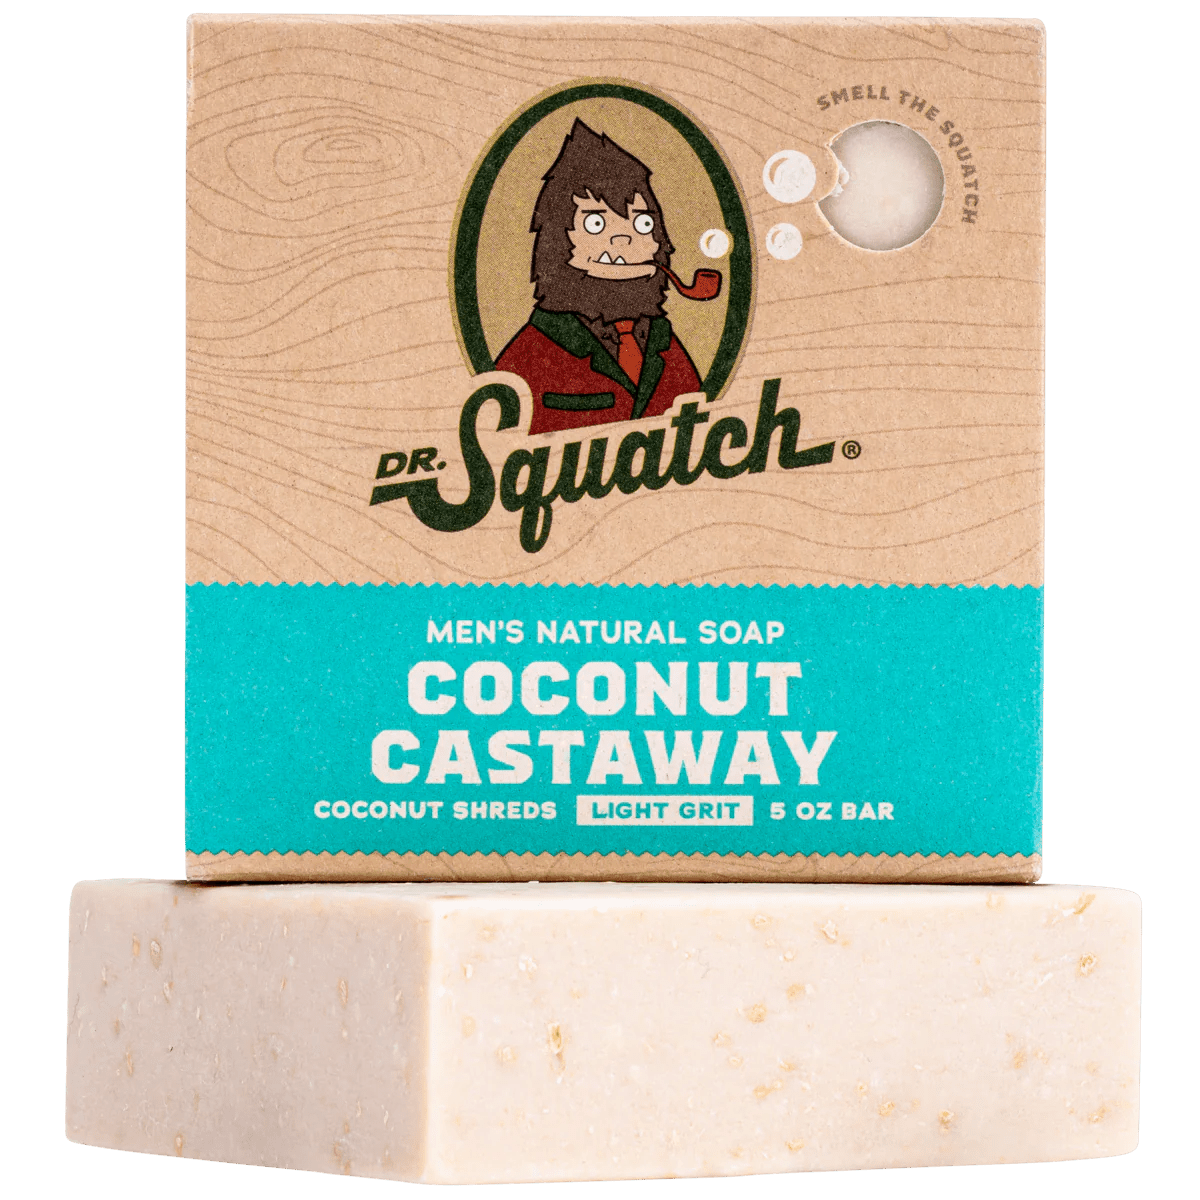 Dr. Squatch Bar Soap, Bay Rum – Blue Claw Co. Bags and Leather Accessories  For Men